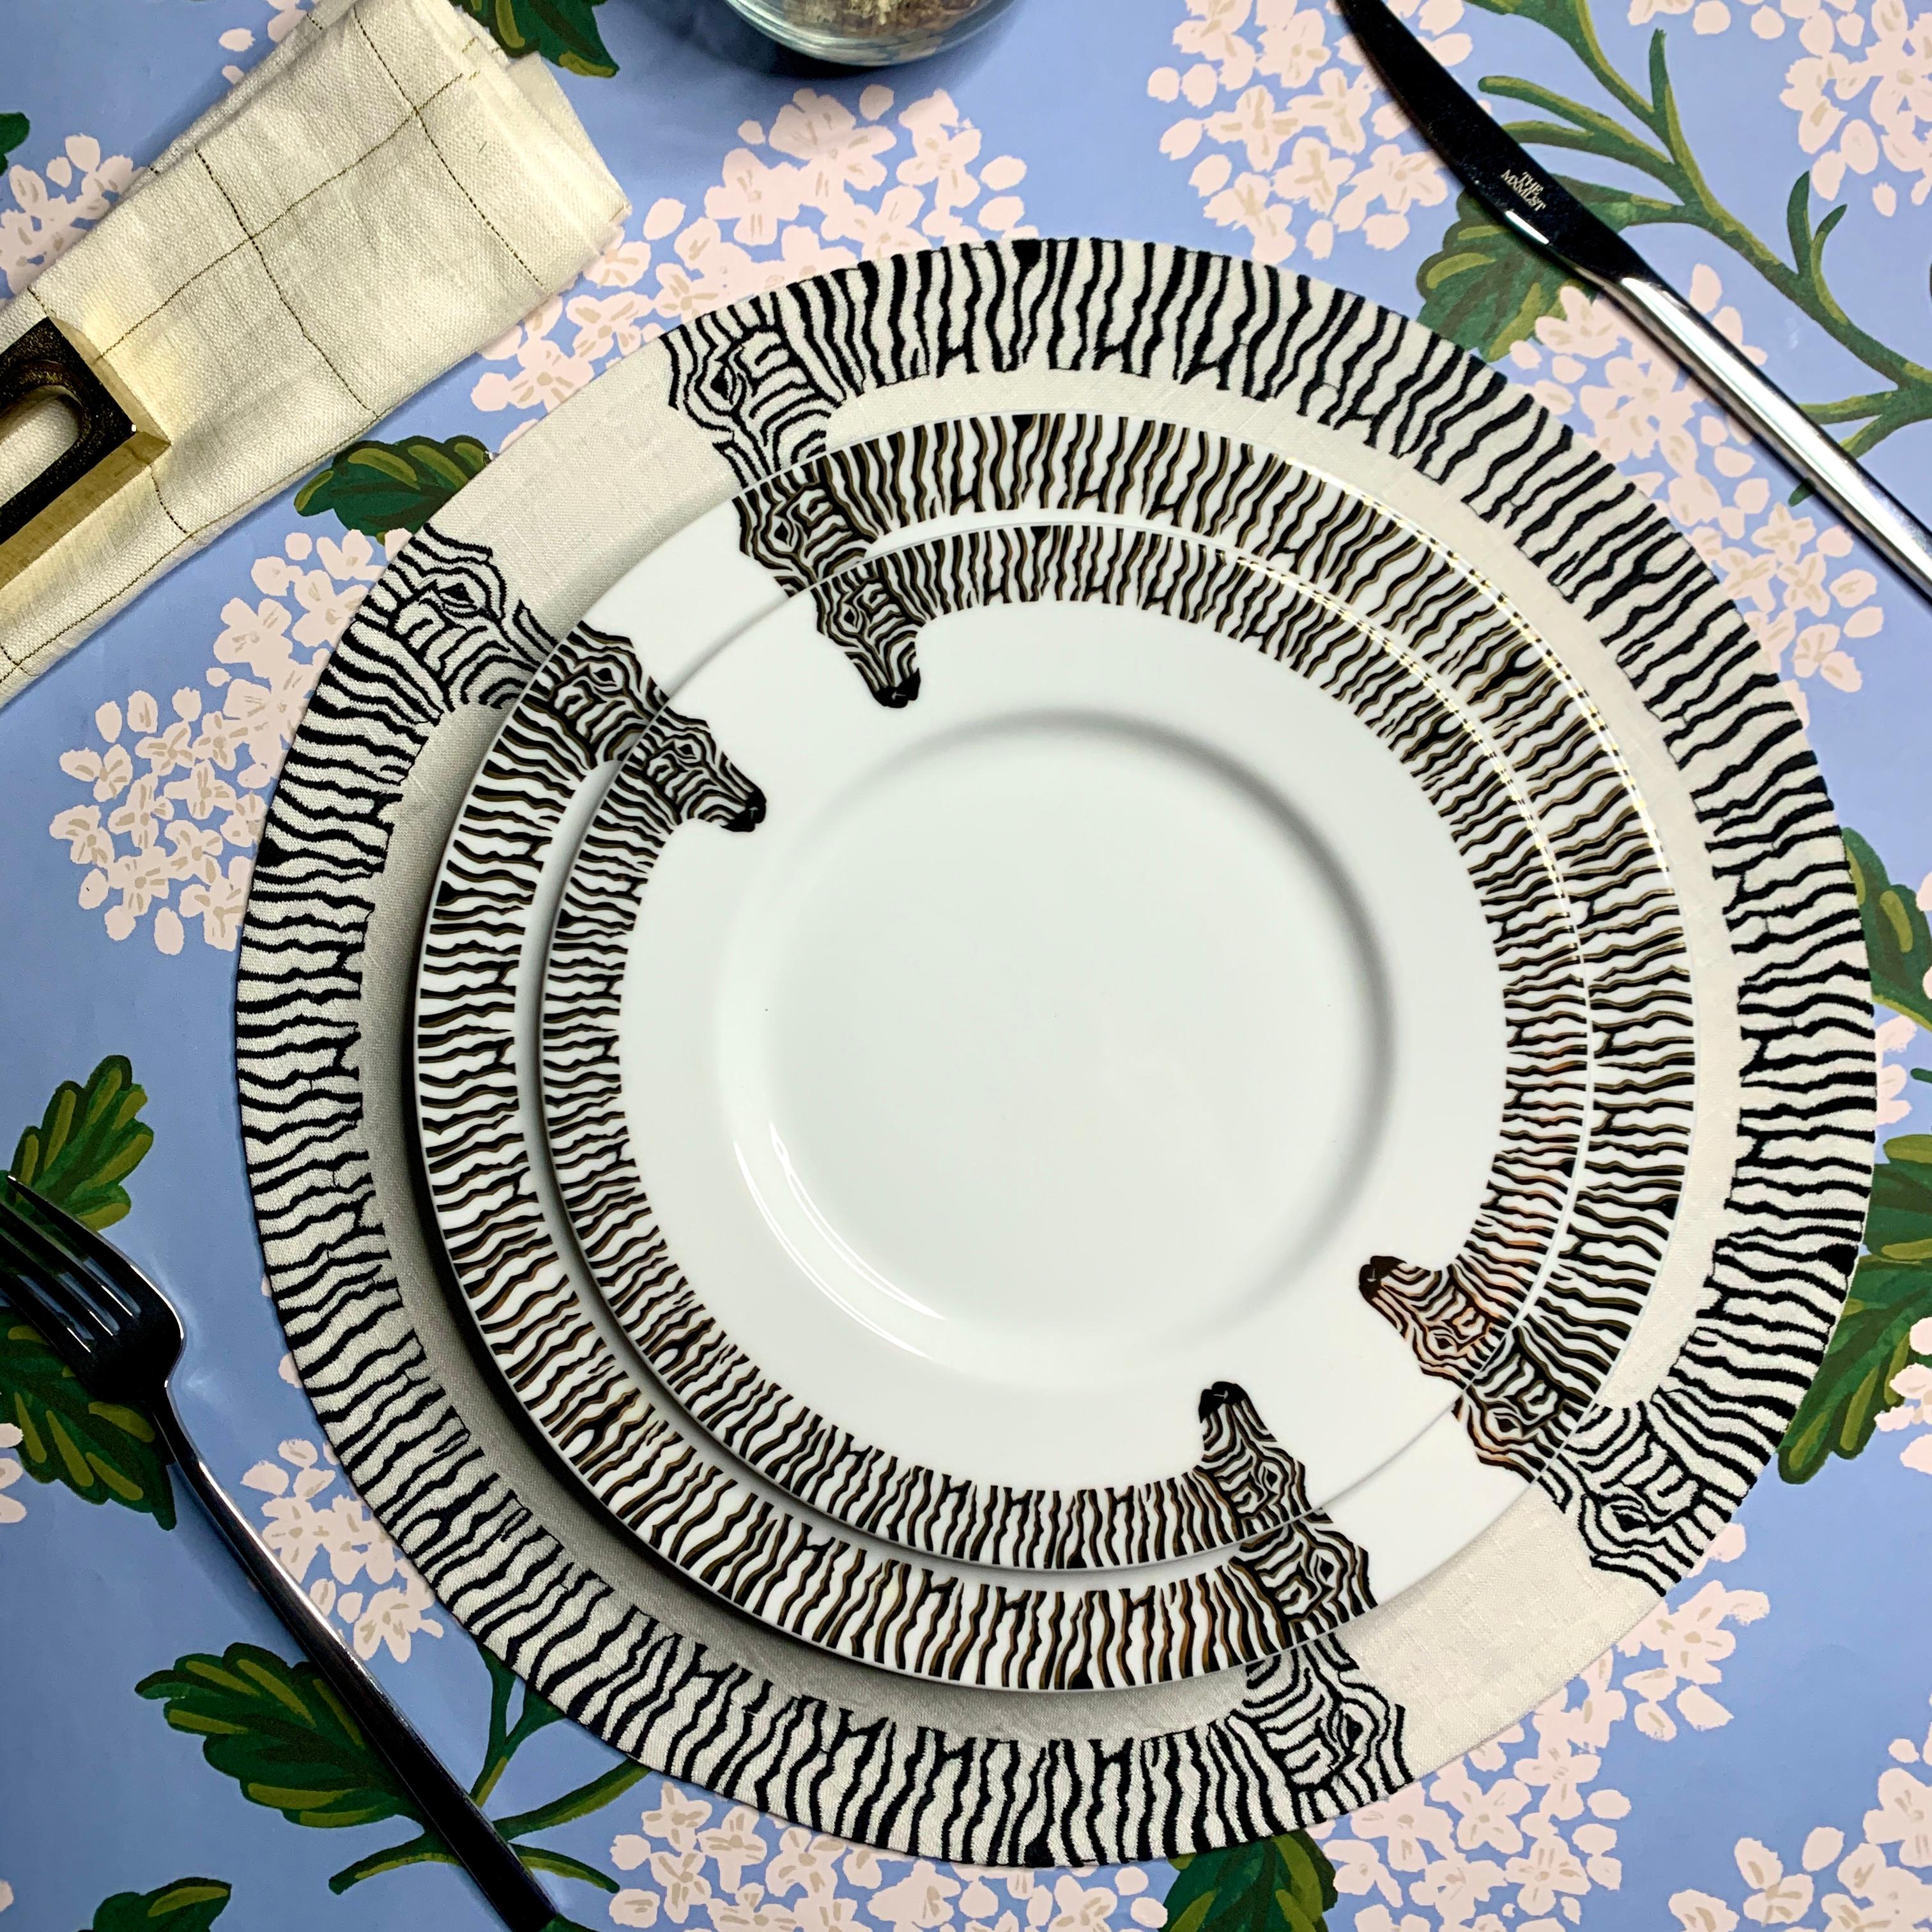 Influenced by the graphic black and white zebra print and the iconic David Webb, the Les Roux dinner plate features a zebra that hugs the rim of the plate. Each black stripe is shadowed by a layer of 12k gold to add a touch of luxury to this dinner